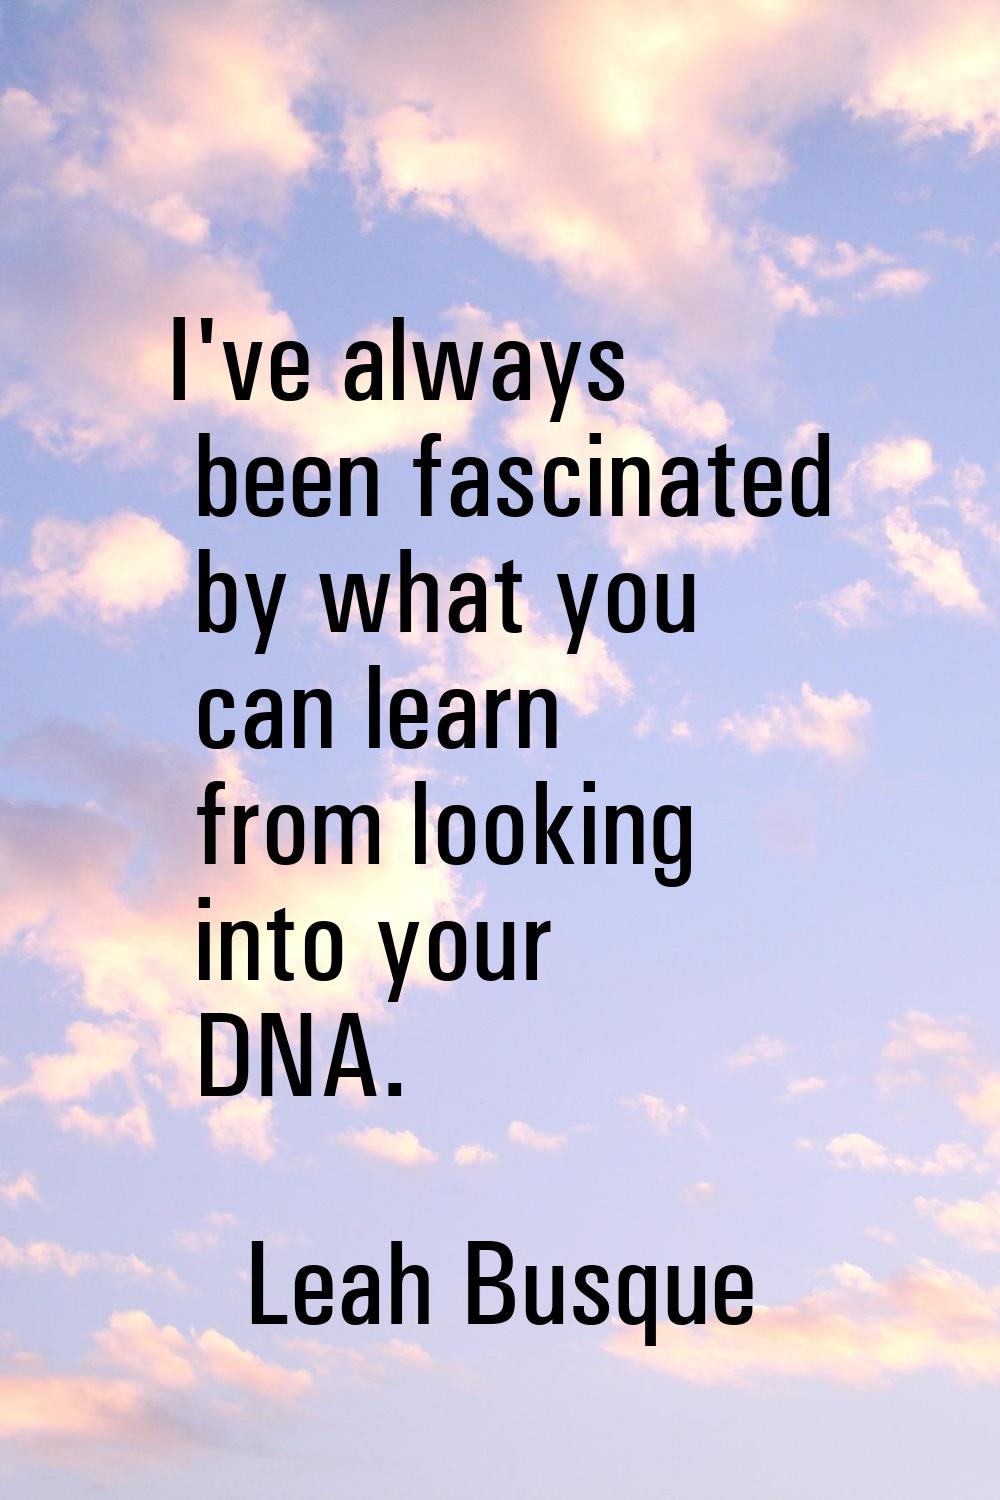 I've always been fascinated by what you can learn from looking into your DNA.